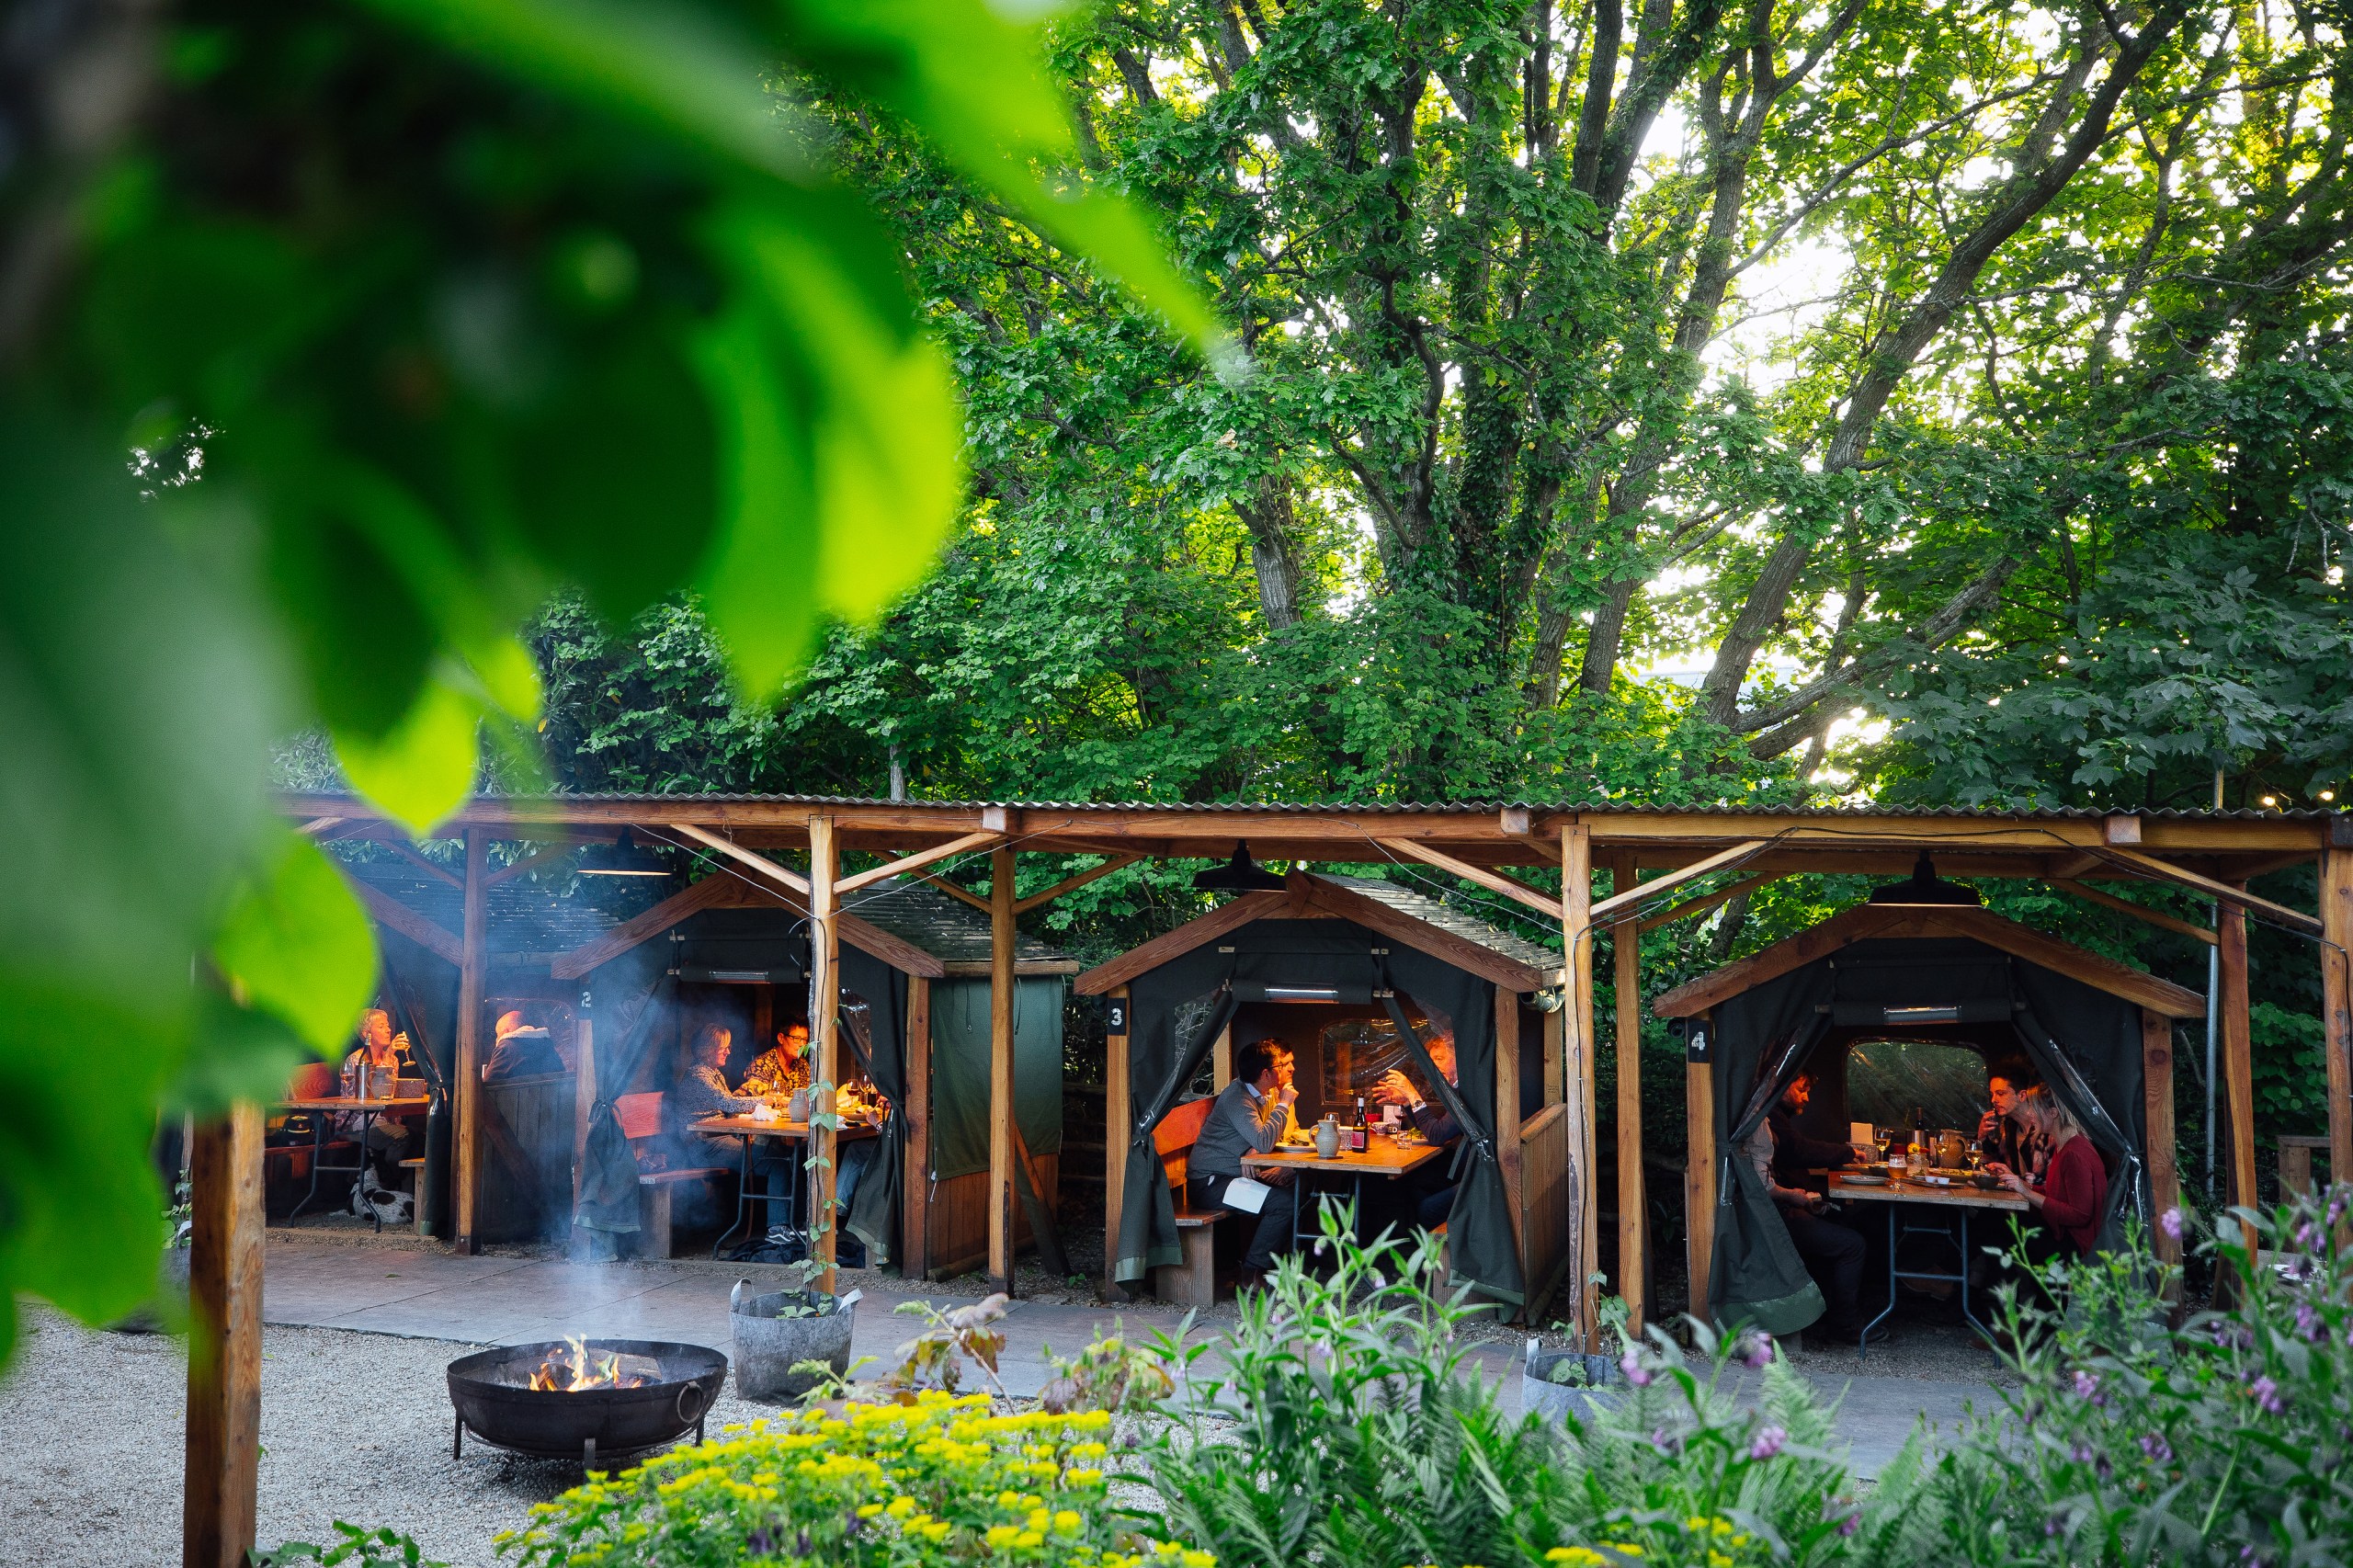 Dining huts in the Secret Garden are perfect for summer soirées